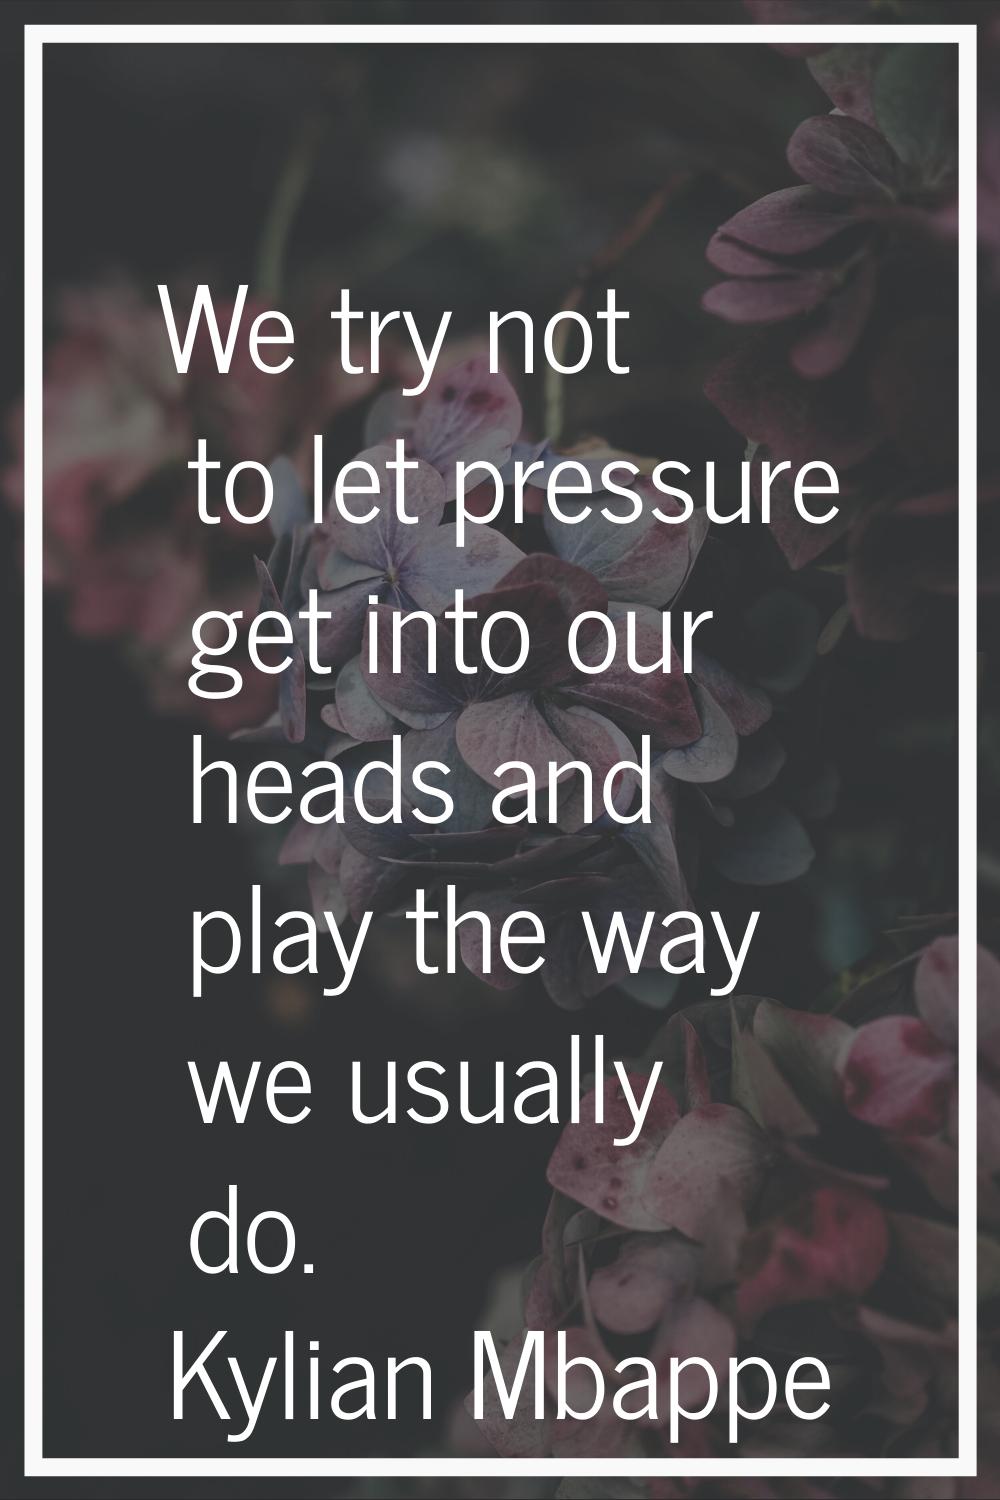 We try not to let pressure get into our heads and play the way we usually do.